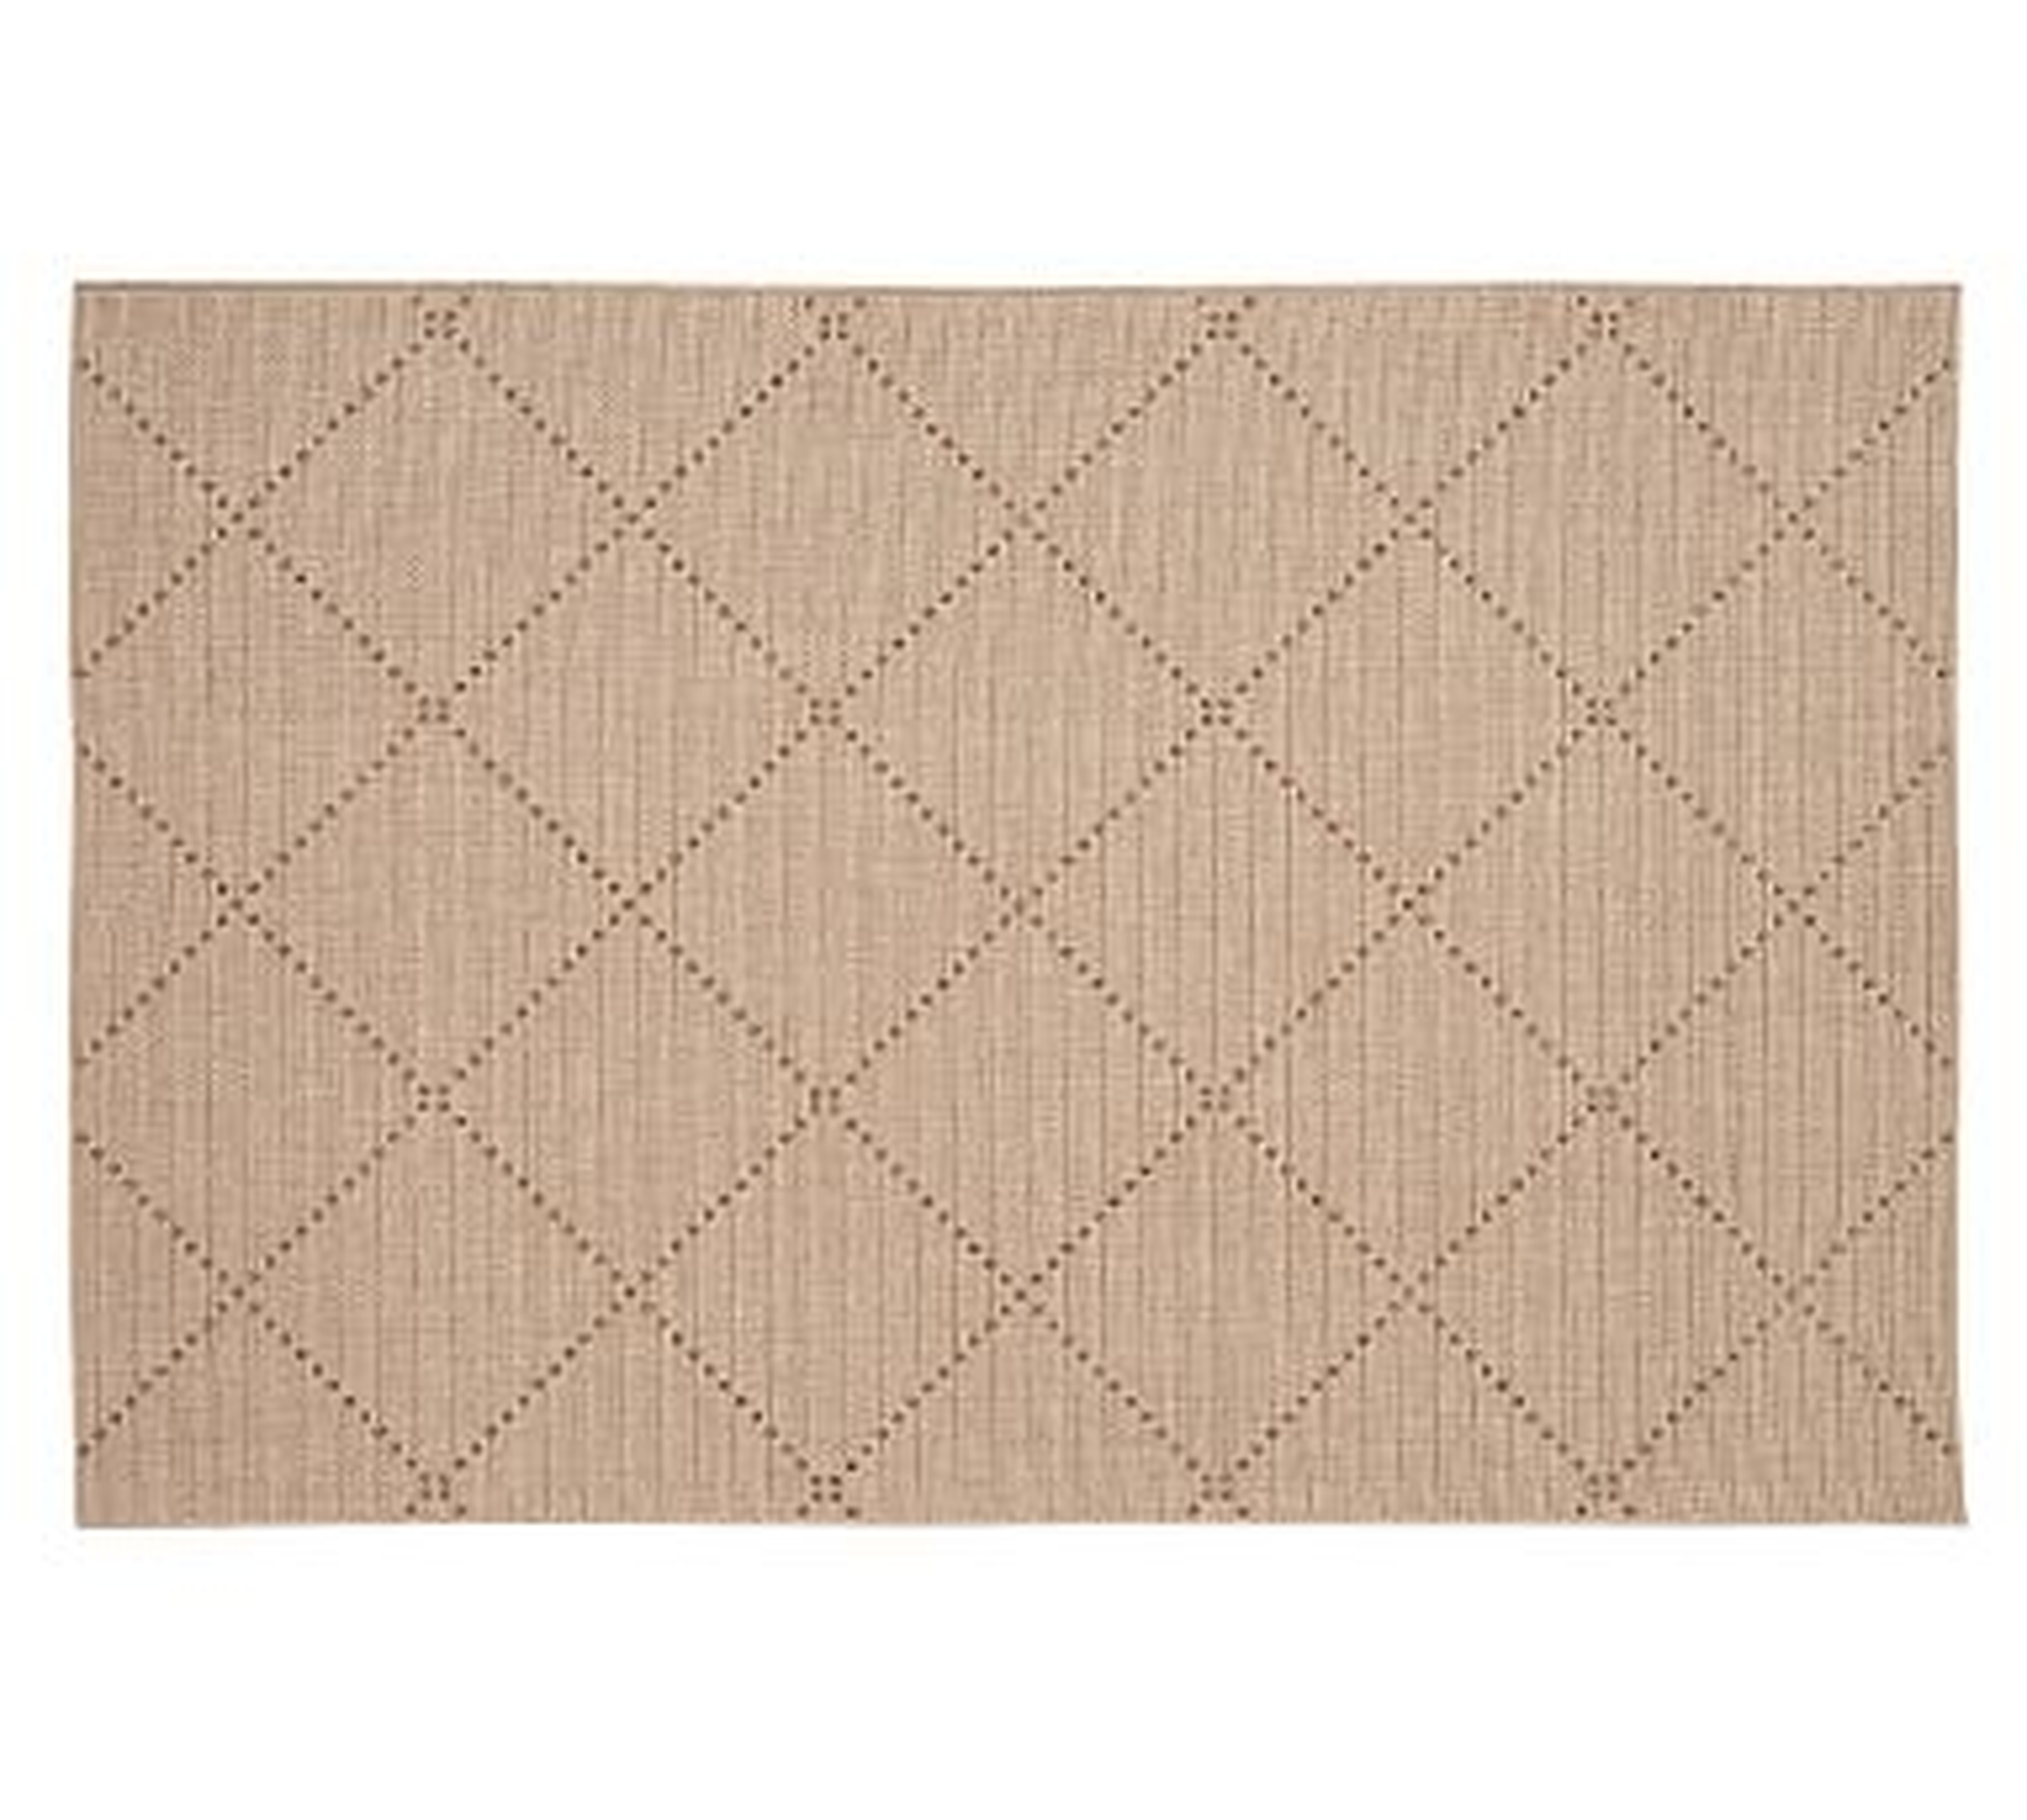 Kimmy Handwoven Outdoor Rug, 8 x 10', Natural/Earth - Pottery Barn